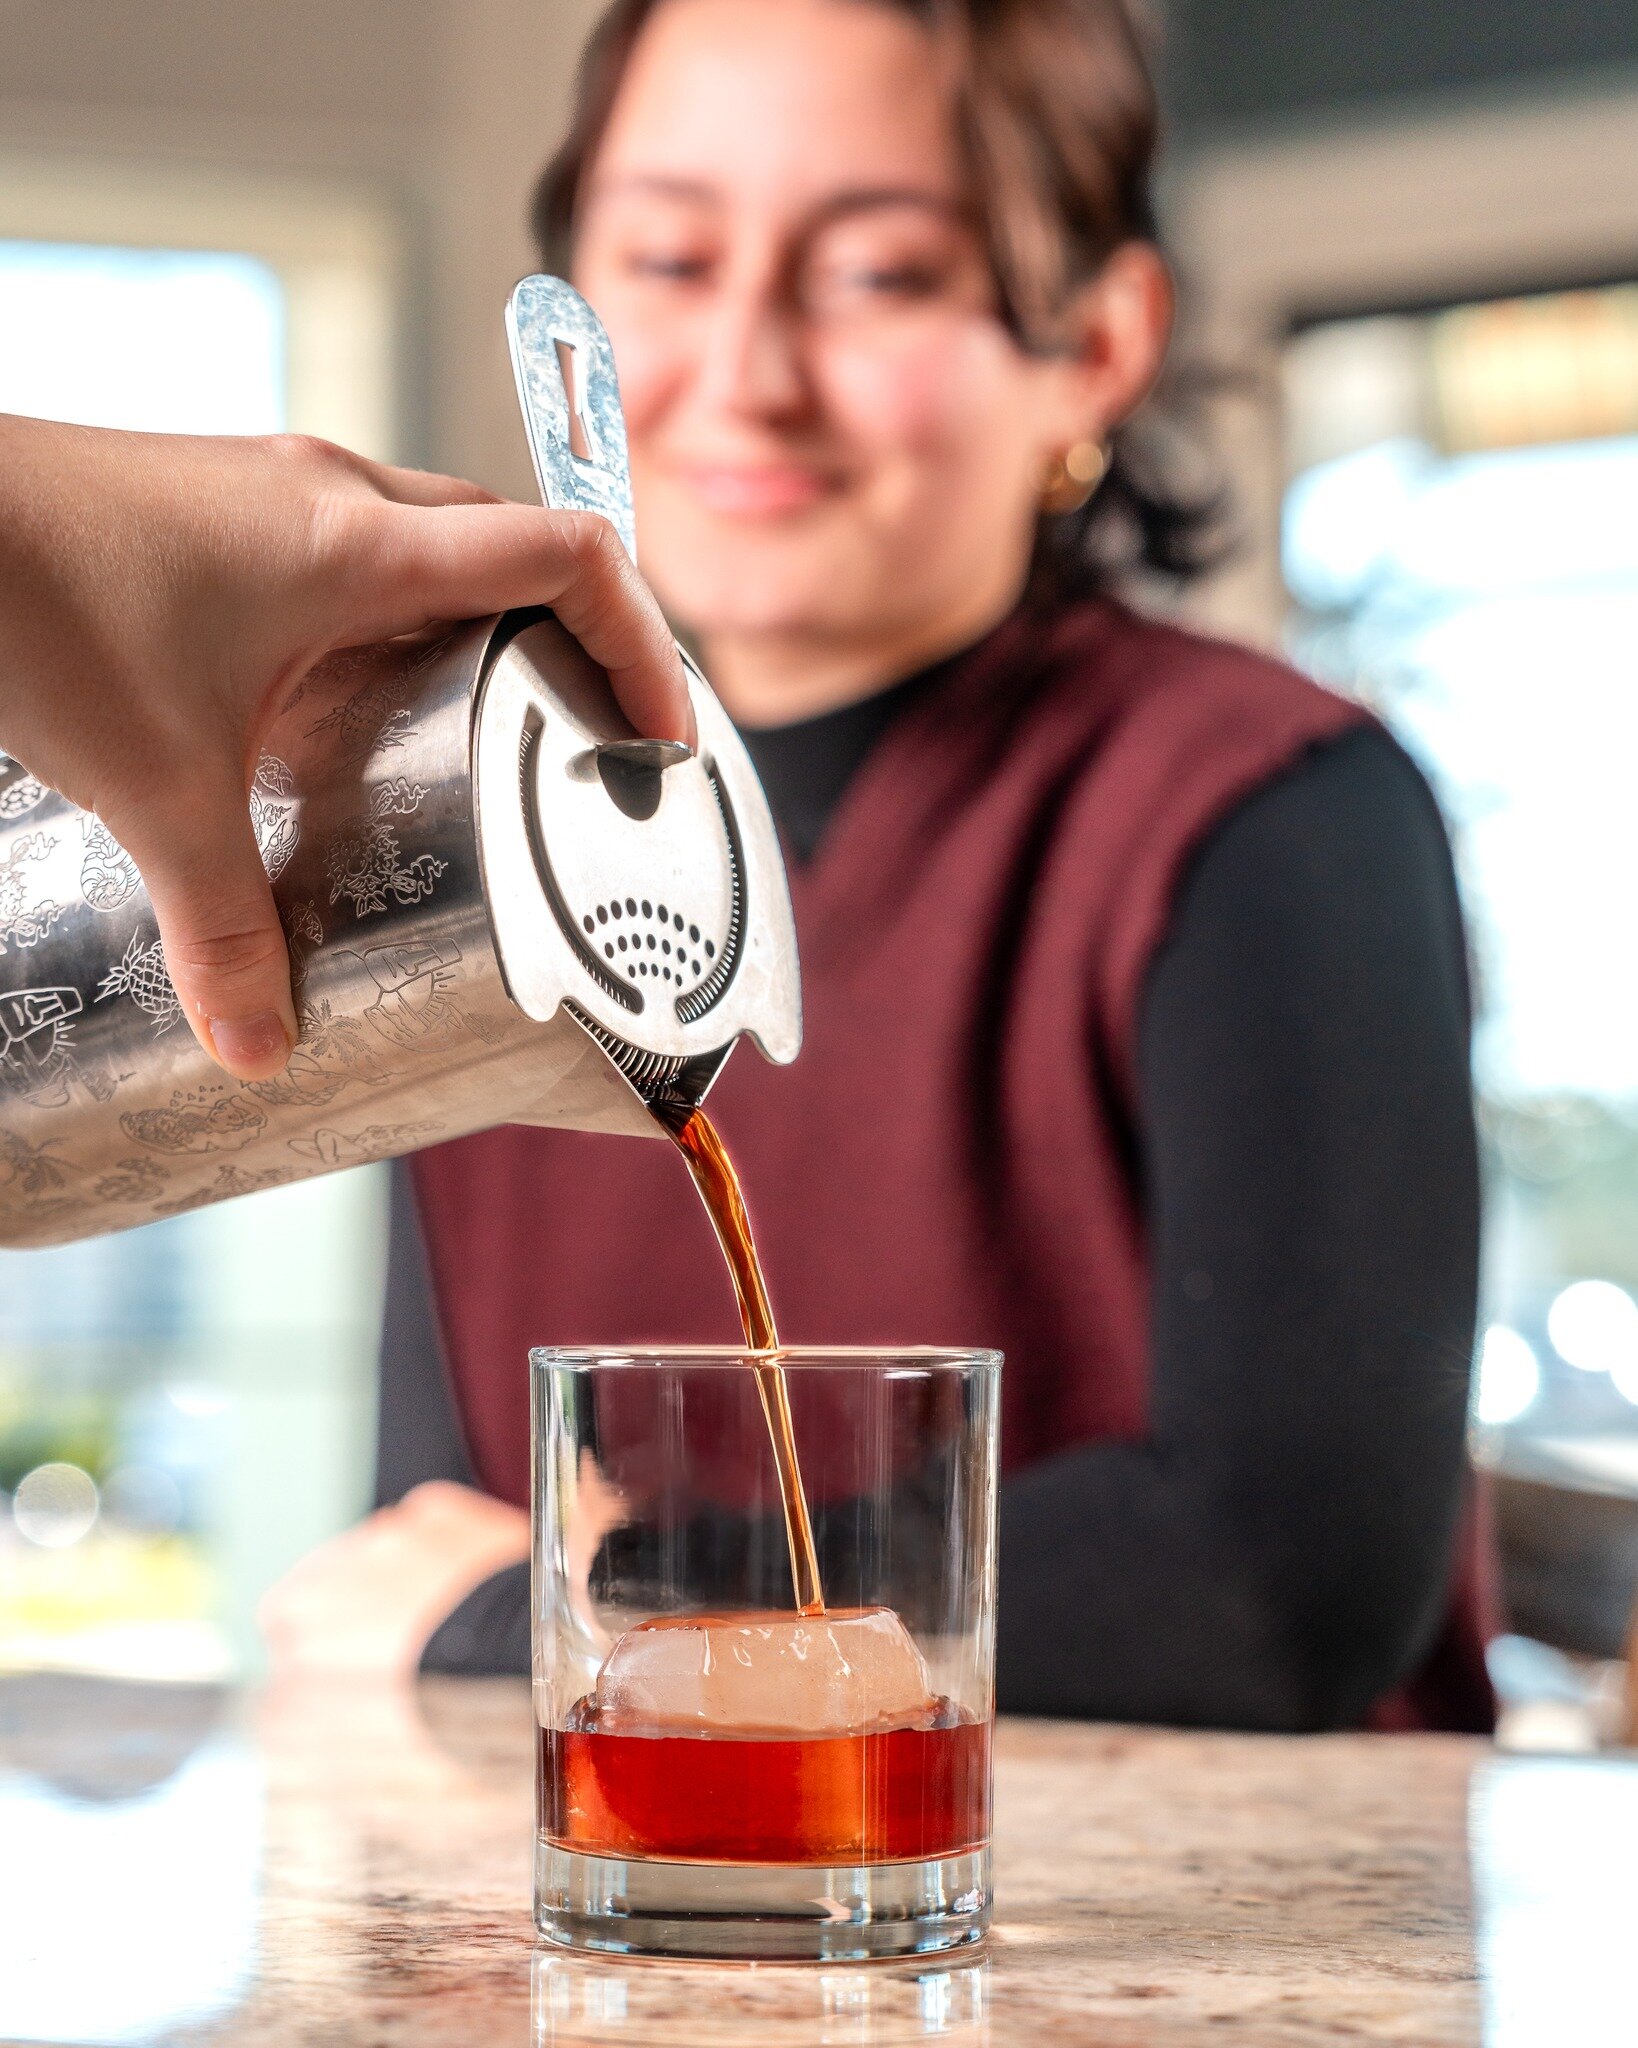 Our Black Forest Old Fashioned  is a Valentine's riff on a cocktail classic. Spirit forward with @woodford, we stir in an Amerena Cherry Simple Syrup, with Aztec Chocolate Bitters, giving the cocktail a lovely, sweet note. Stop in this month to give 